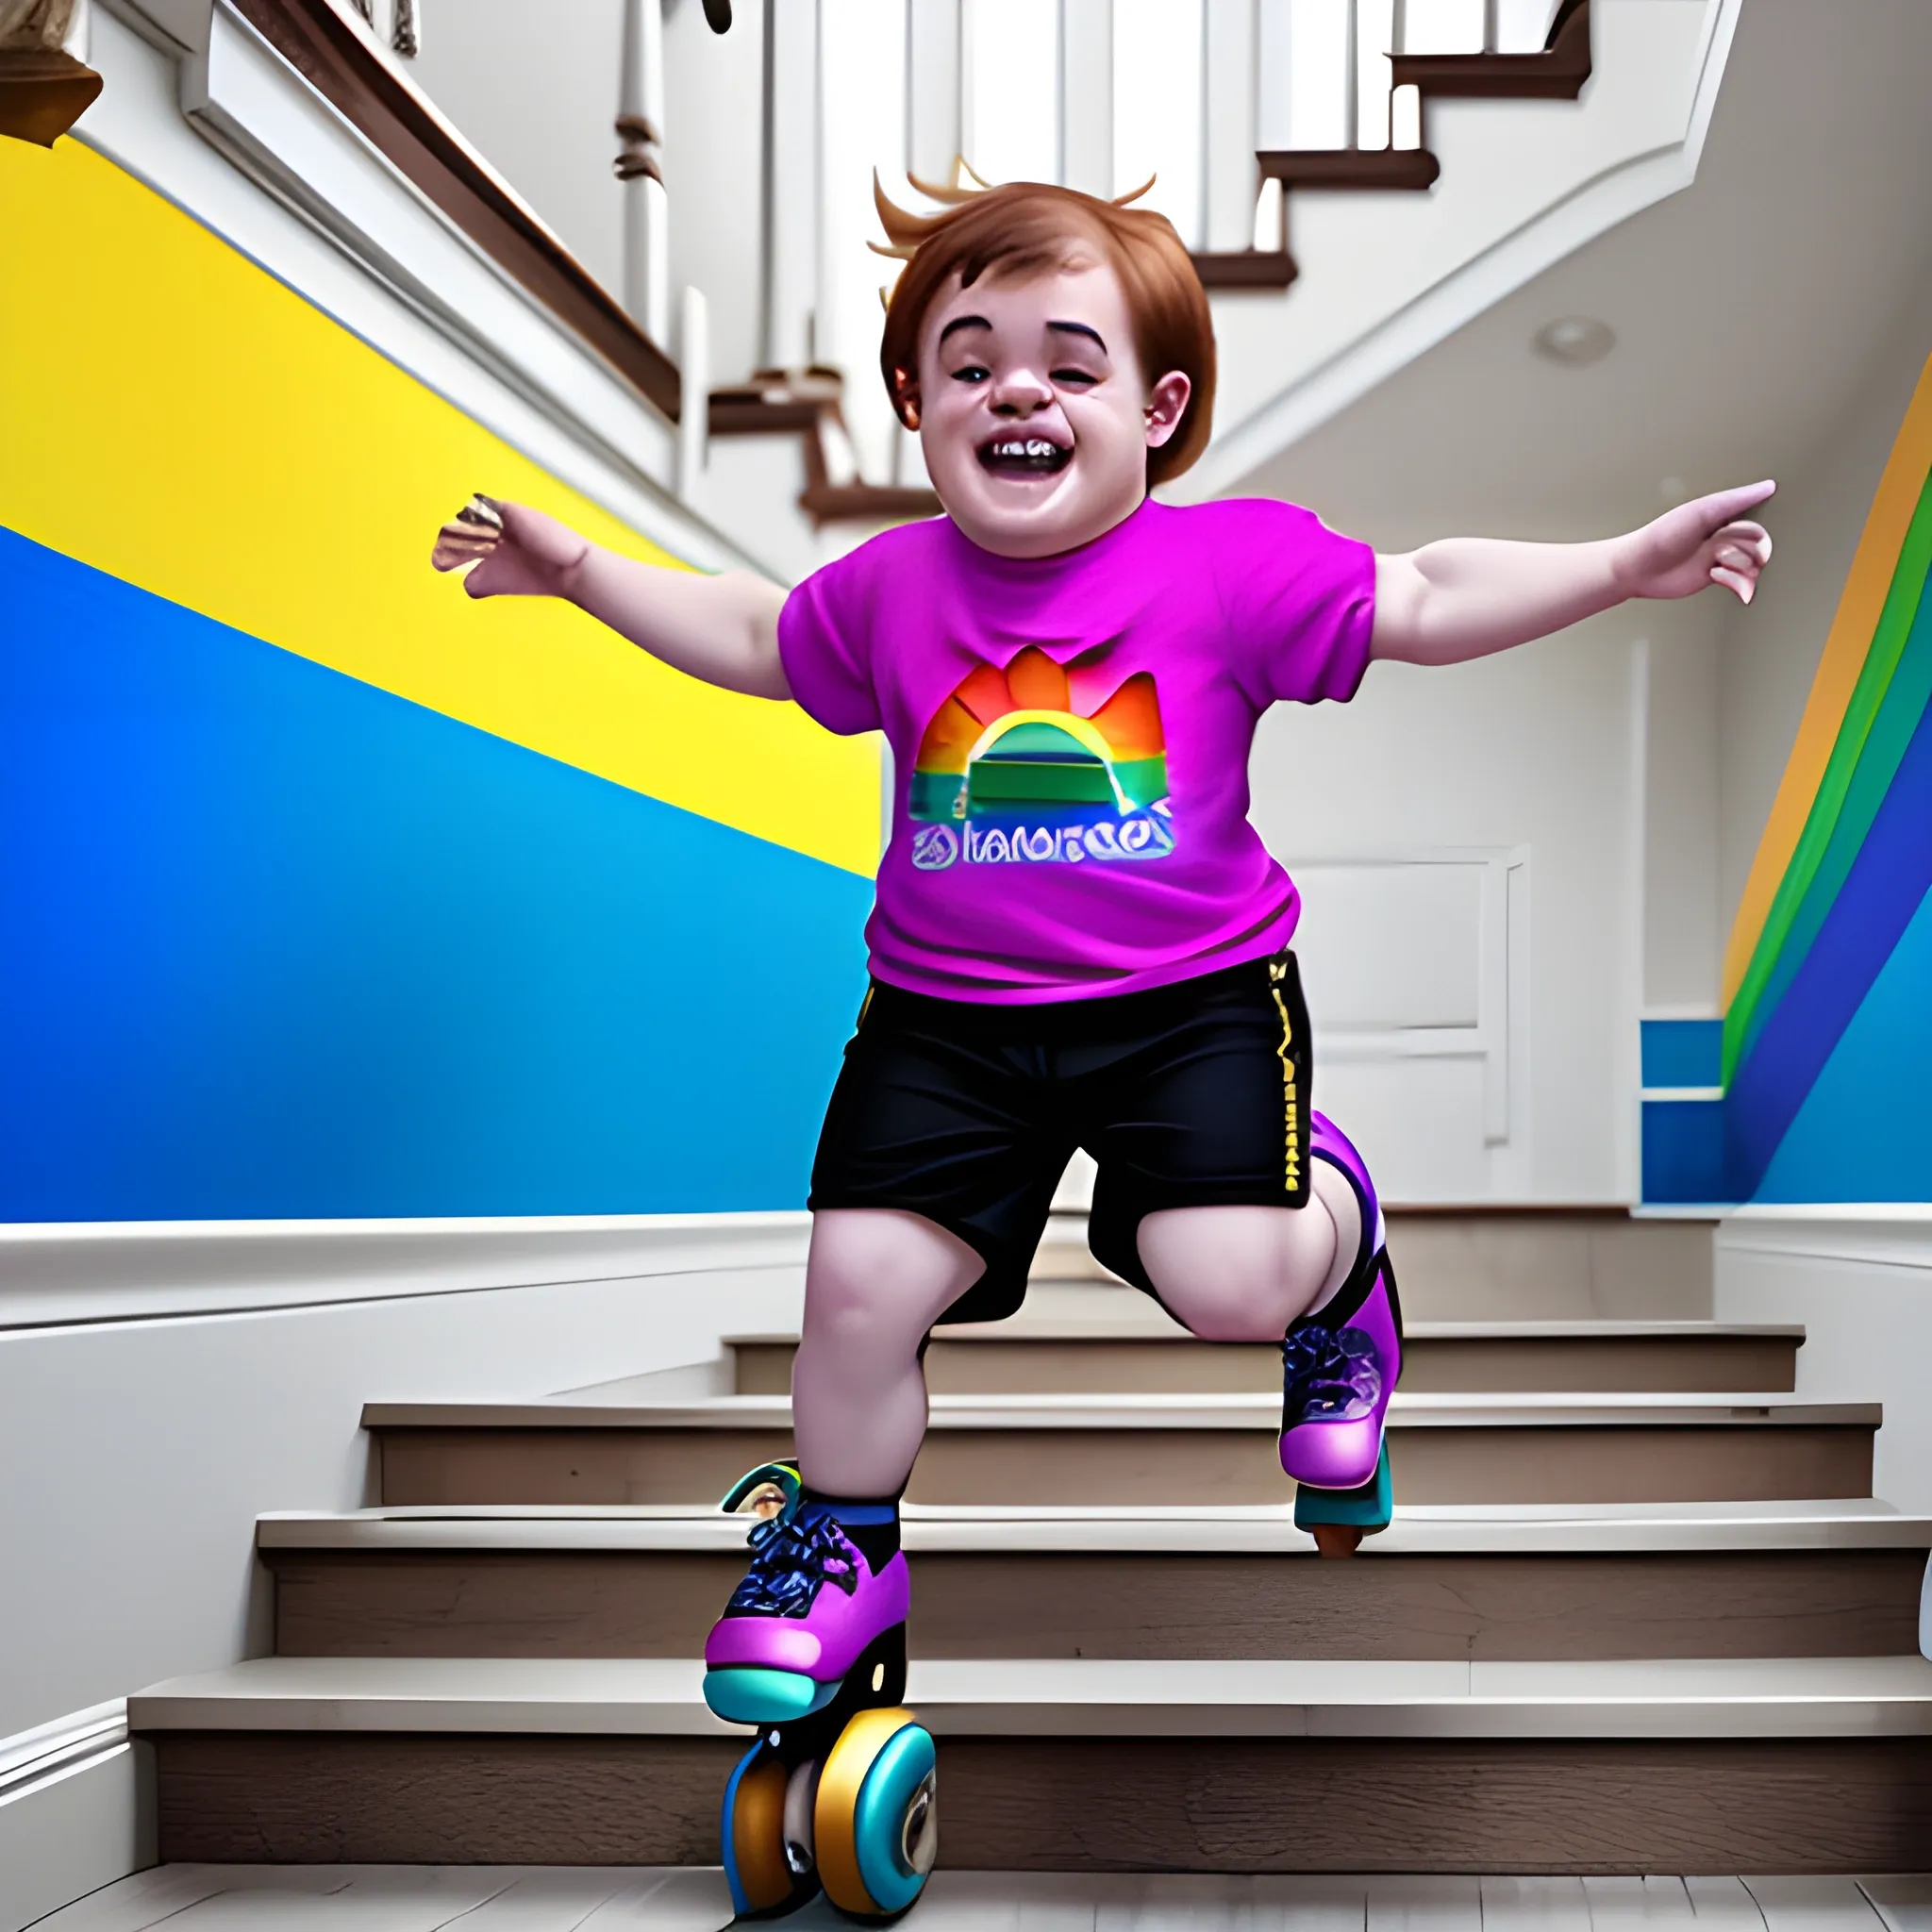 man with dwarfism with down syndrome jumping from stairs on rollerskates wearing a rainbow shirt